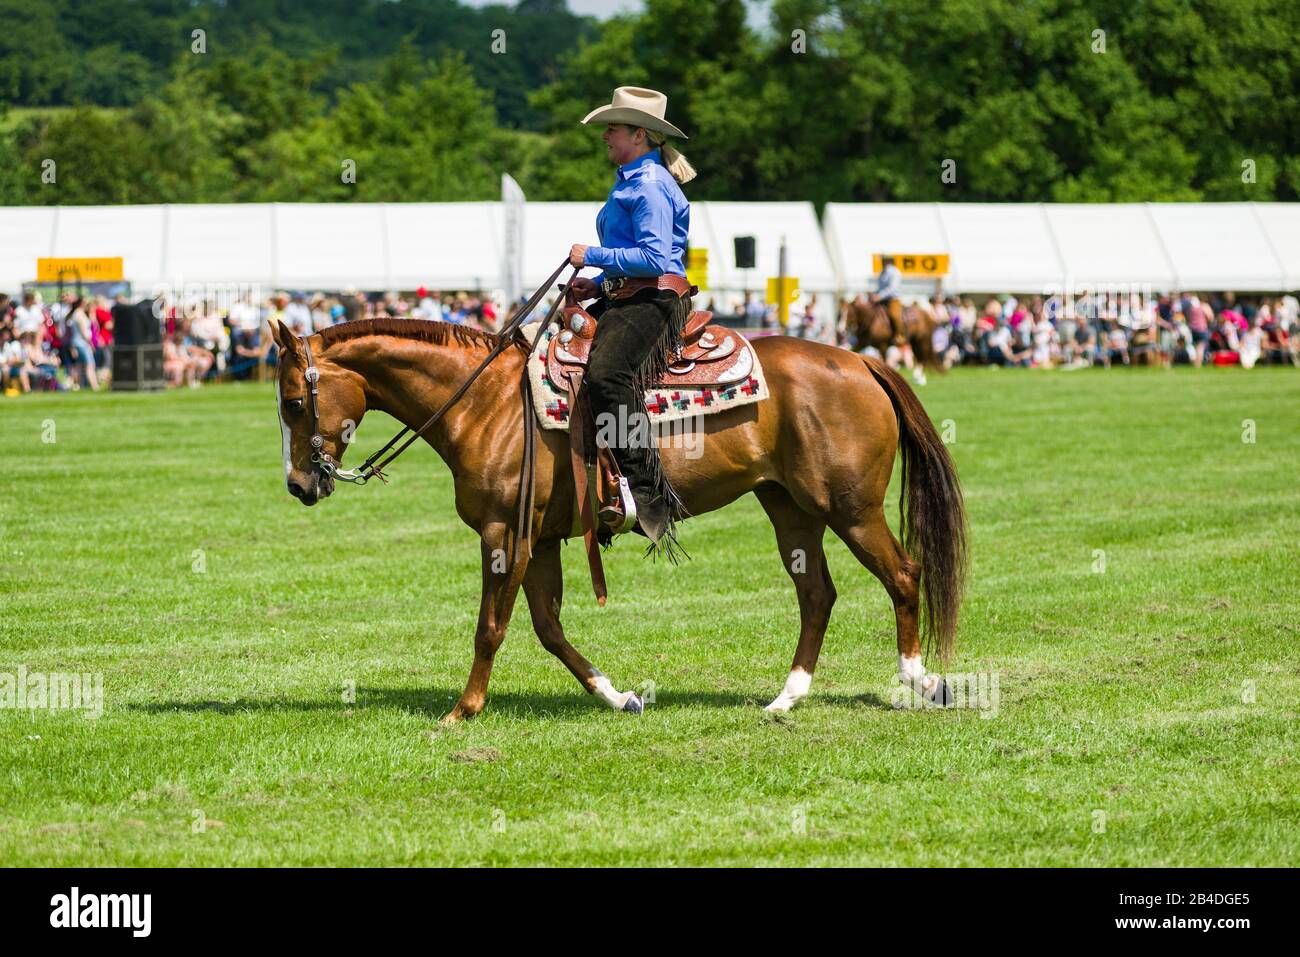 A female horse rider  in stetson hat with crowd behind, Cambridgeshire County Show, United Kingdom Stock Photo